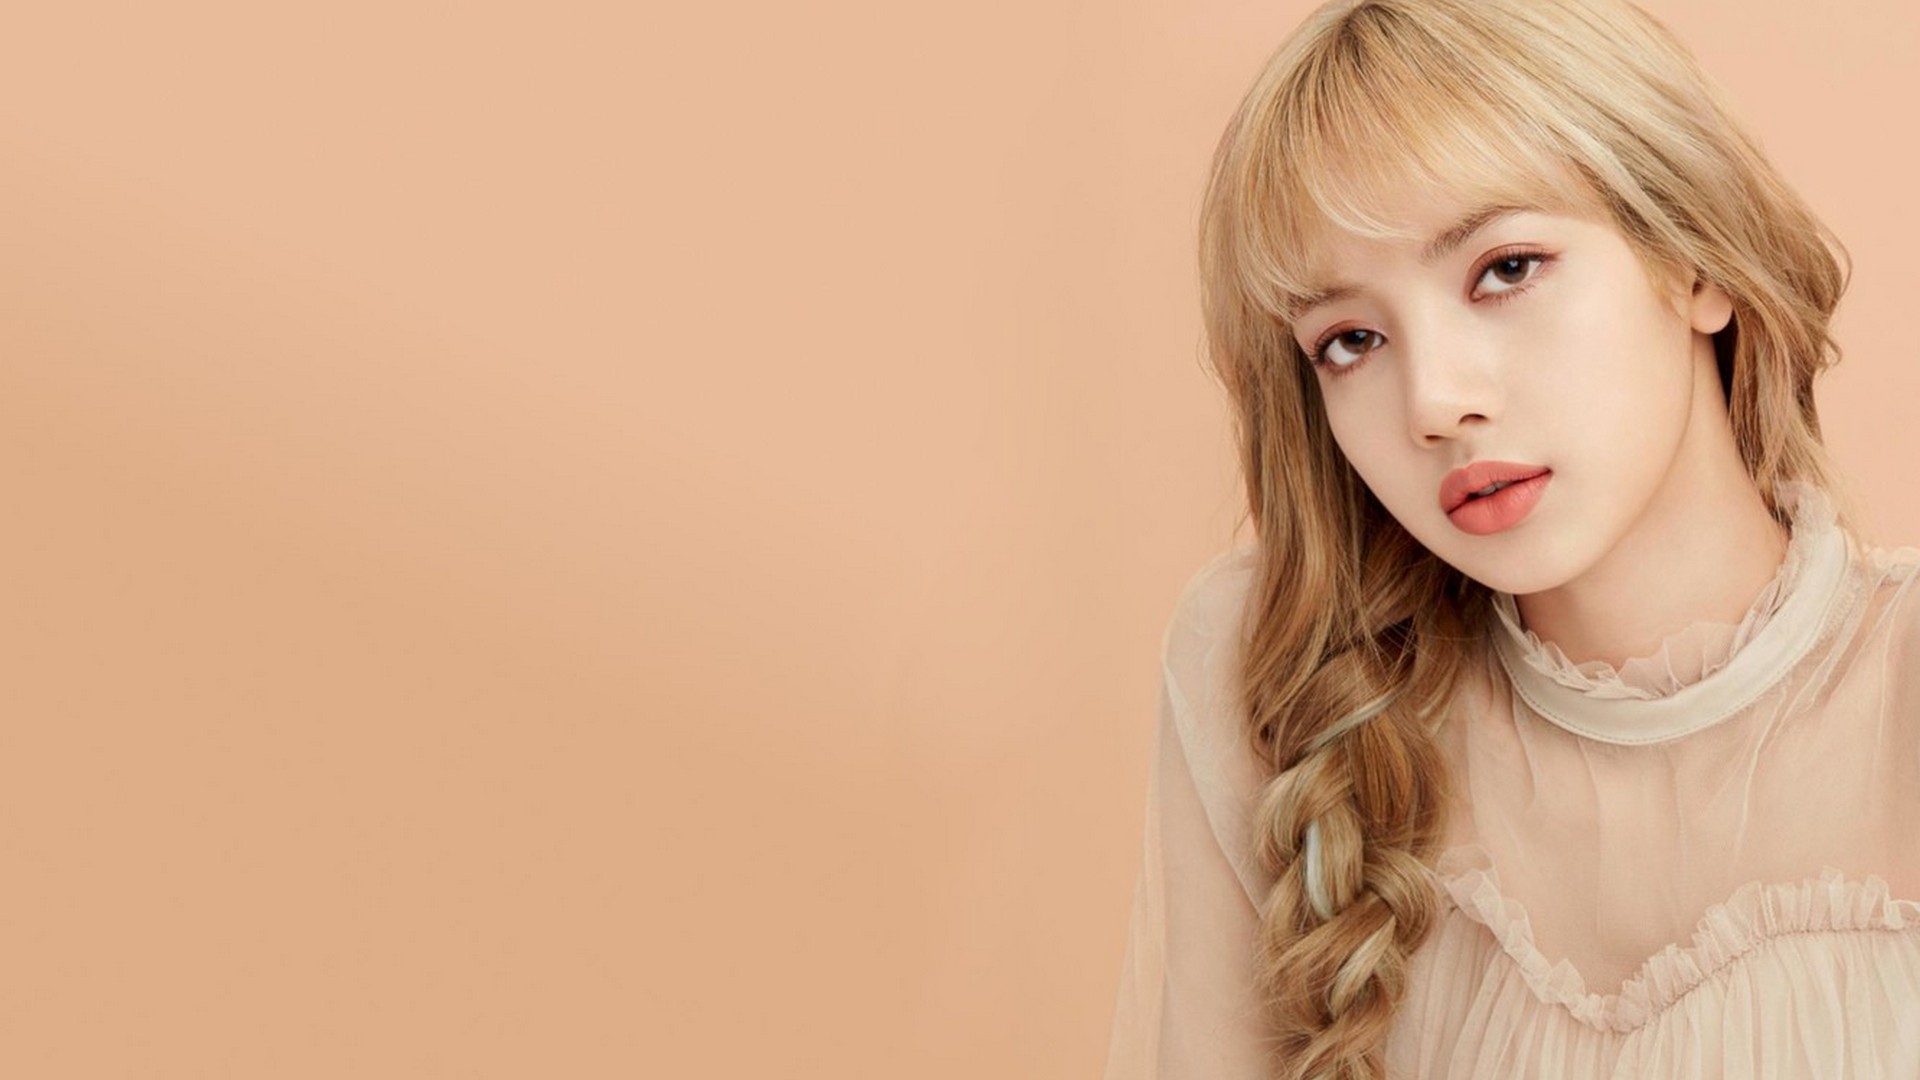 Lisa Blackpink Wallpaper HD with high-resolution 1920x1080 pixel. You can use this wallpaper for your Windows and Mac OS computers as well as your Android and iPhone smartphones